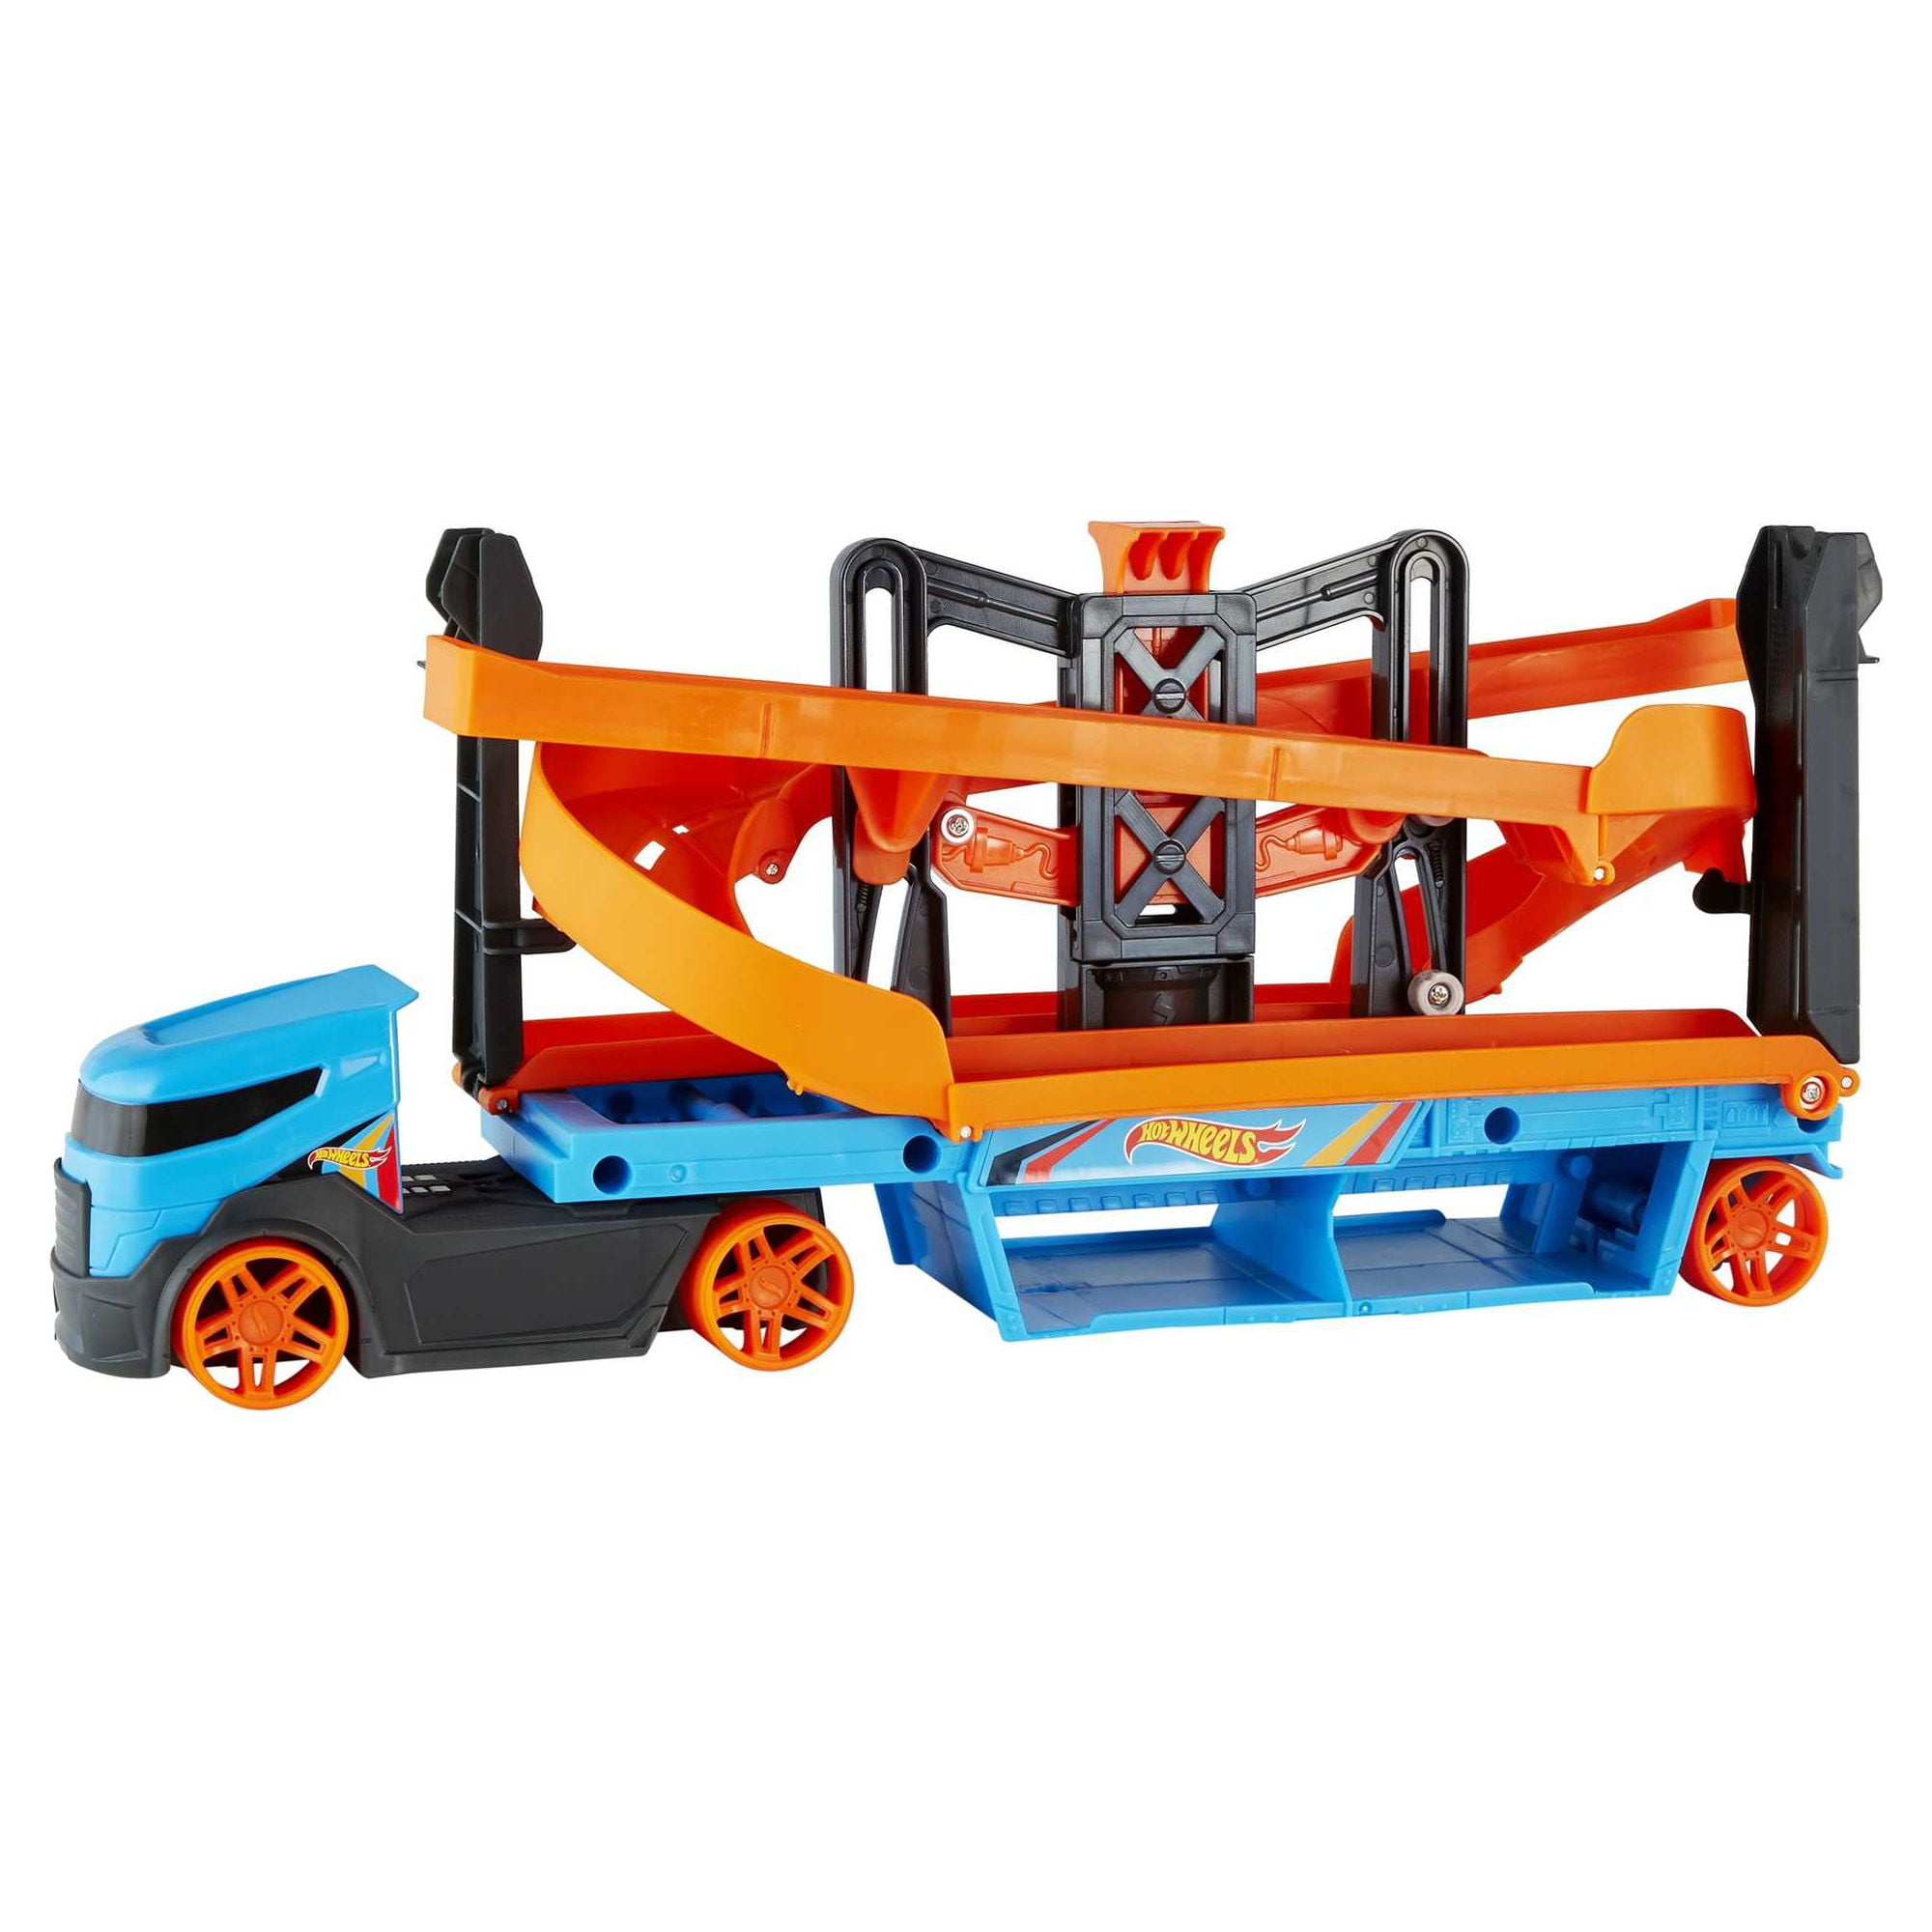 Hot Wheels Lift & Launch Hauler Toy Truck with 10 Cars in 1:64 Scale,  Transporter Stores 20 Vehicles 